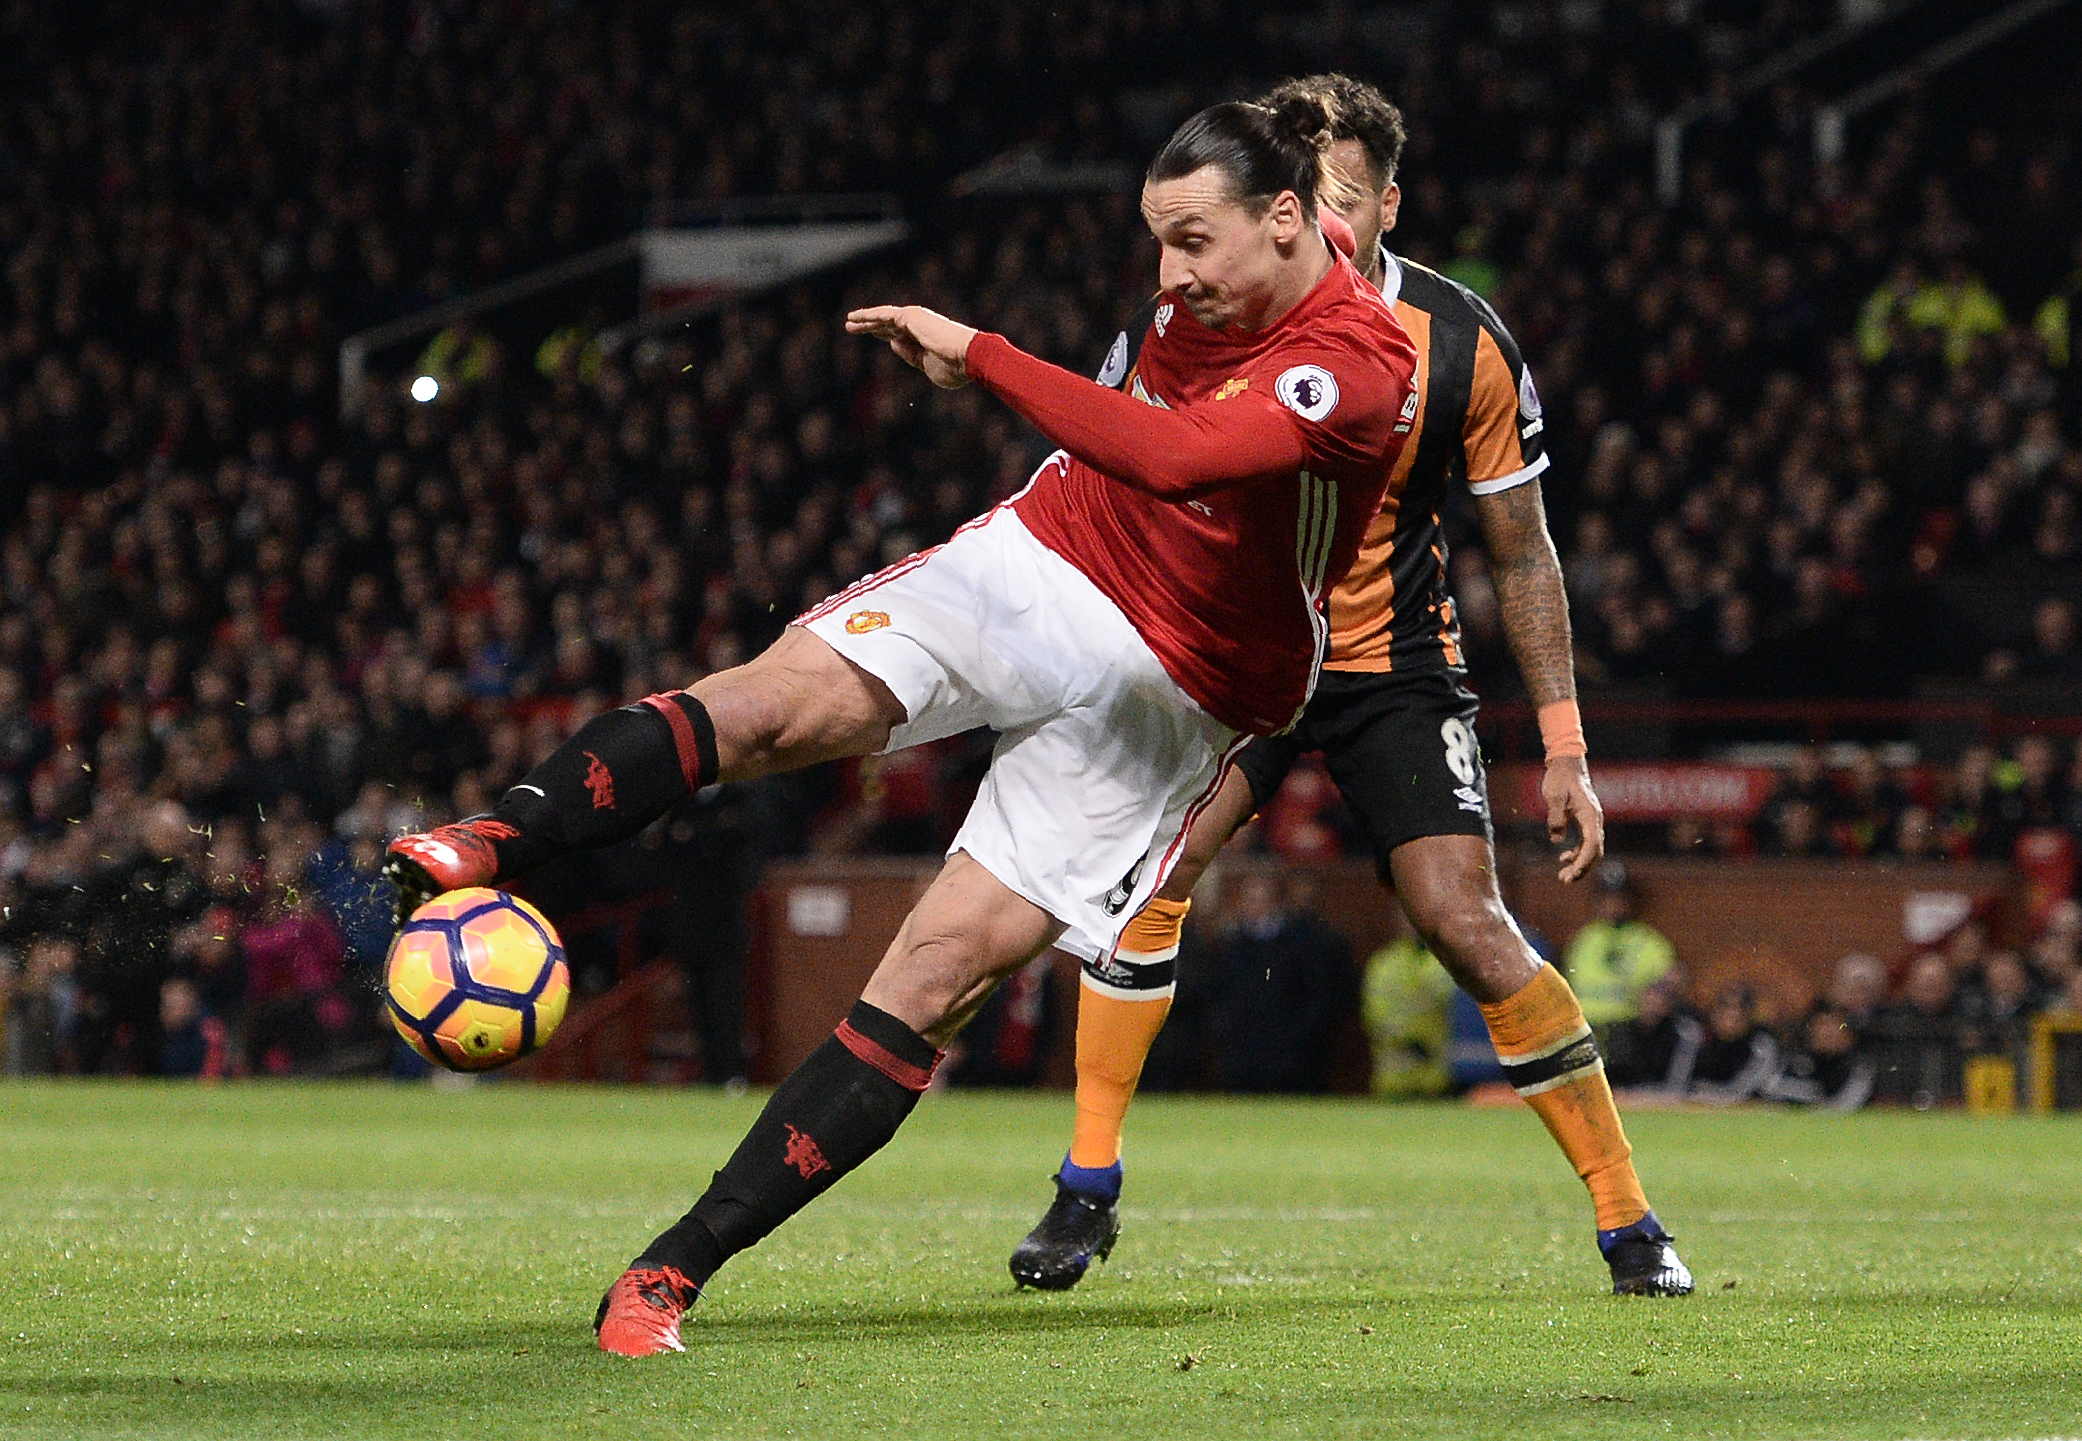 Manchester United's Swedish striker Zlatan Ibrahimovic shoots but fail to score during the English Premier League football match between Manchester United and Hull City at Old Trafford in Manchester, north west England, on February 1, 2017. / AFP / Oli SCARFF / RESTRICTED TO EDITORIAL USE. No use with unauthorized audio, video, data, fixture lists, club/league logos or 'live' services. Online in-match use limited to 75 images, no video emulation. No use in betting, games or single club/league/player publications.  /         (Photo credit should read OLI SCARFF/AFP/Getty Images)